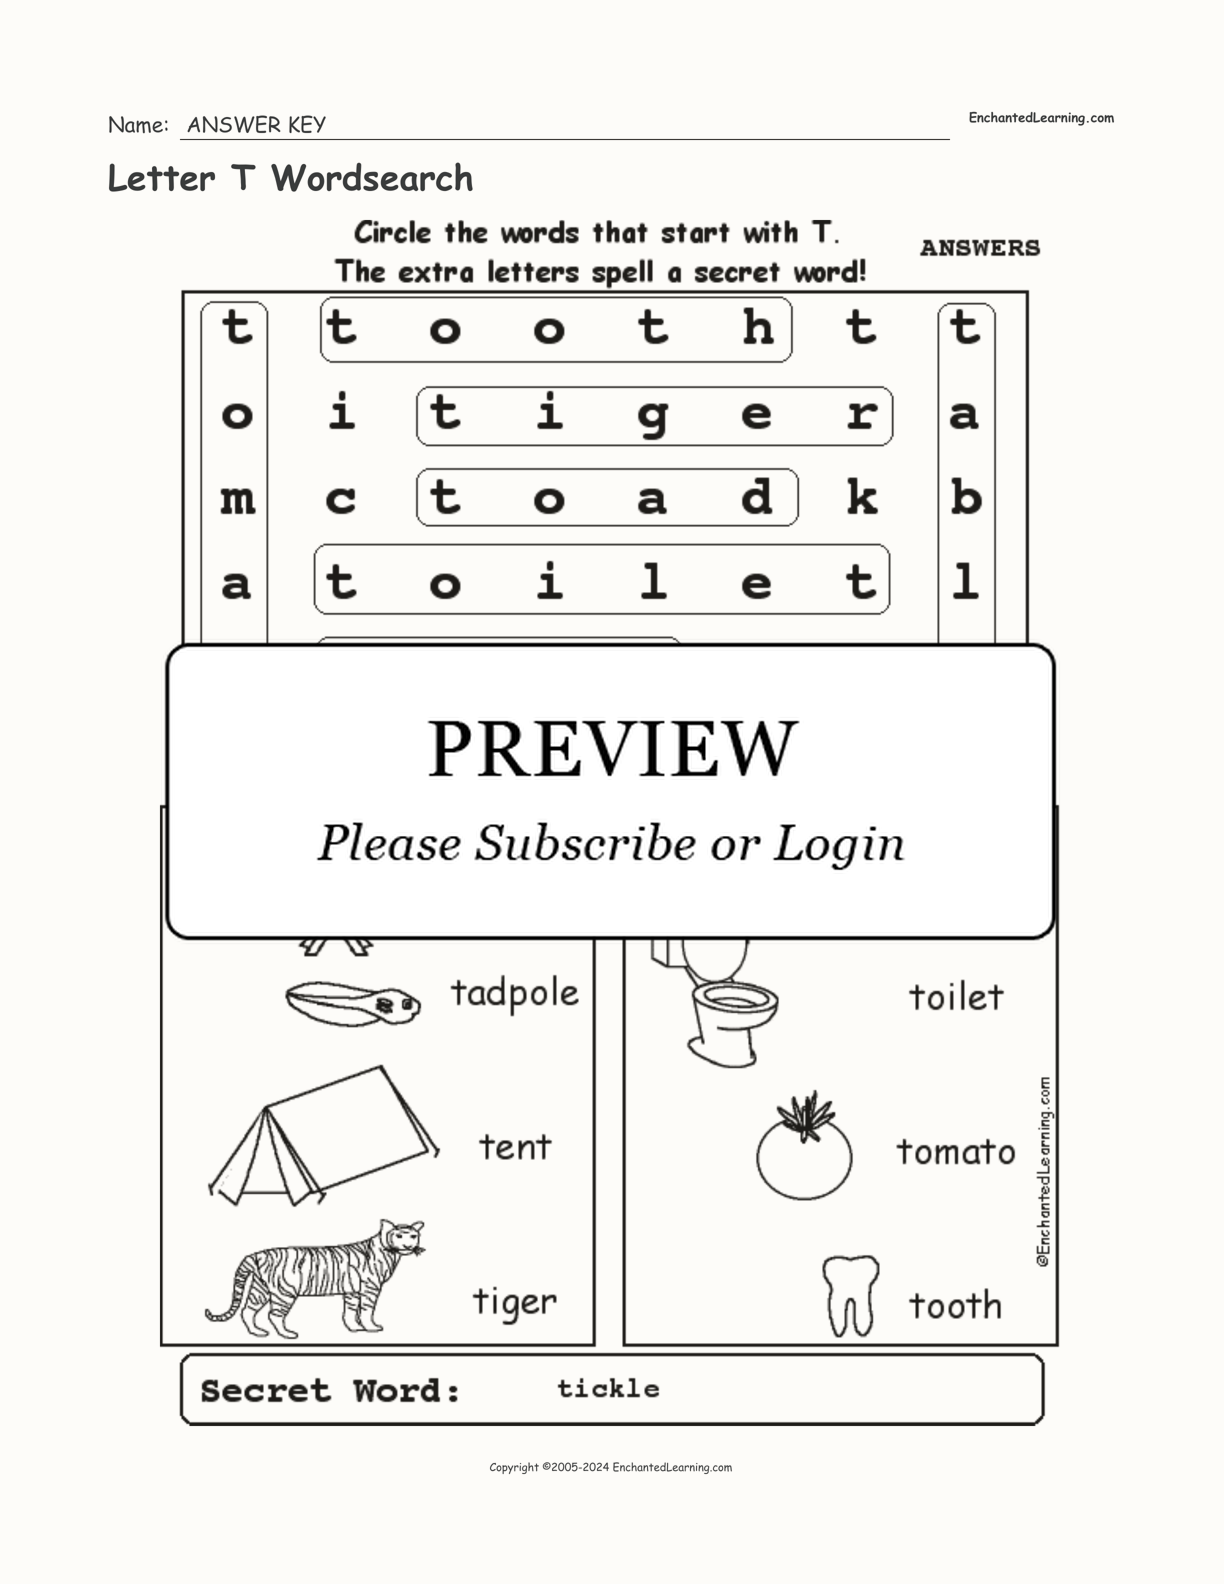 Letter T Wordsearch interactive worksheet page 2